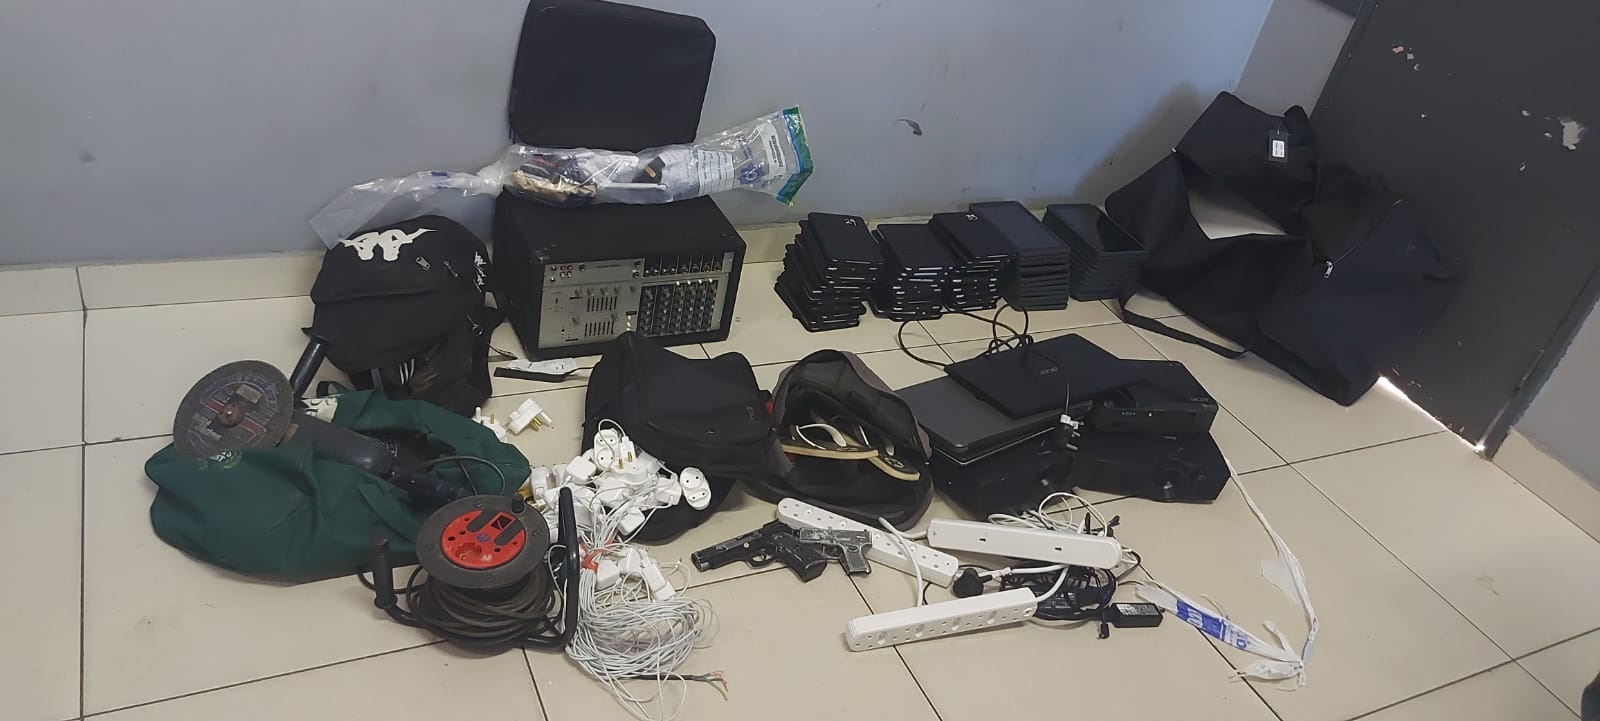 Suspects expected to appear in court for possession of suspected stolen property